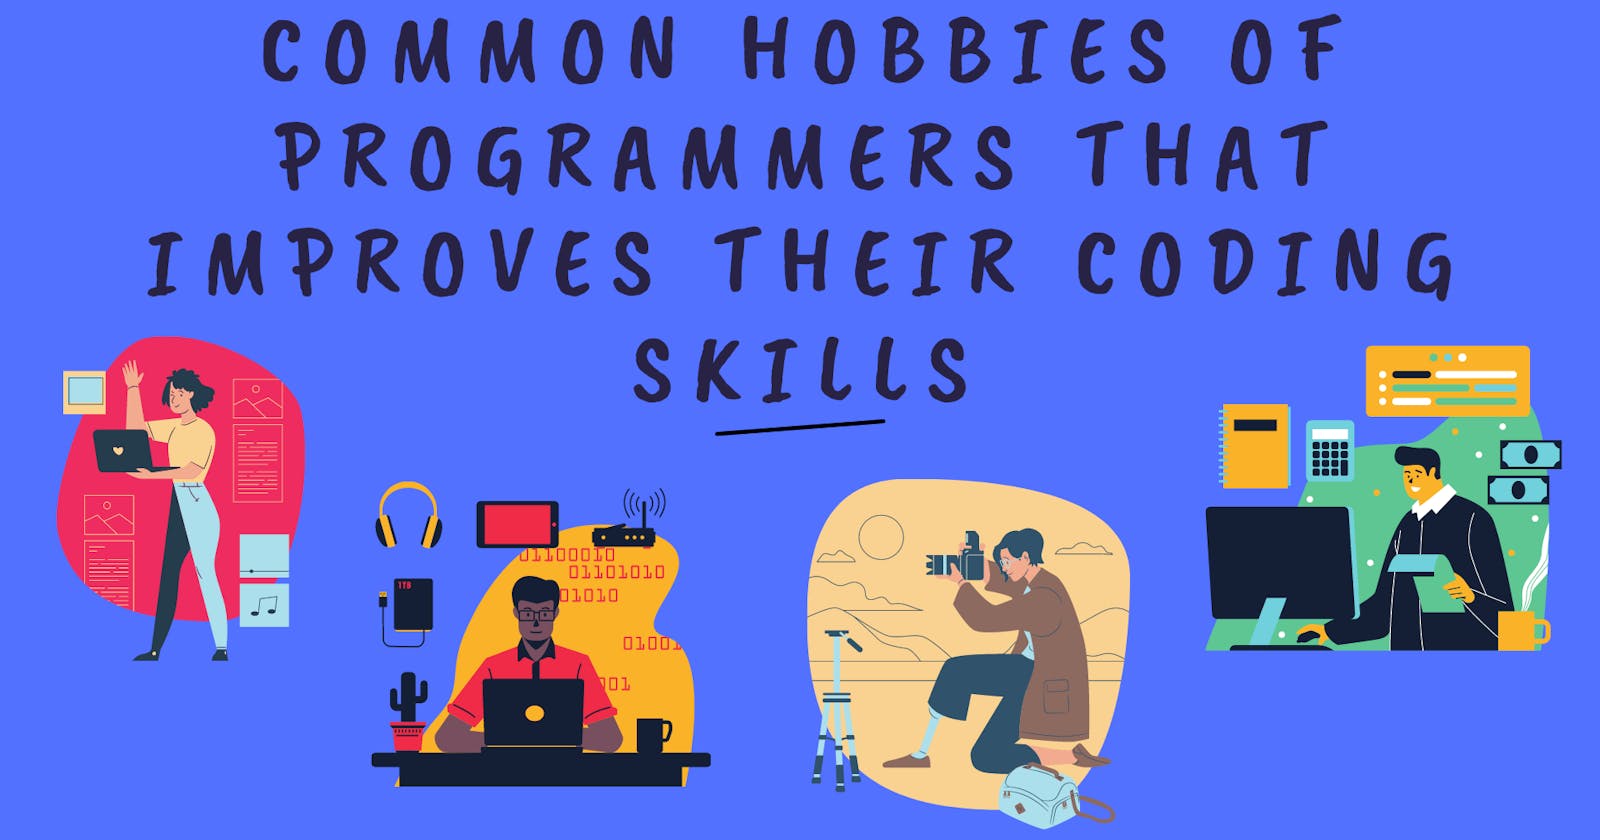 Common Hobbies Of Programmers That Improves Their Coding Skills